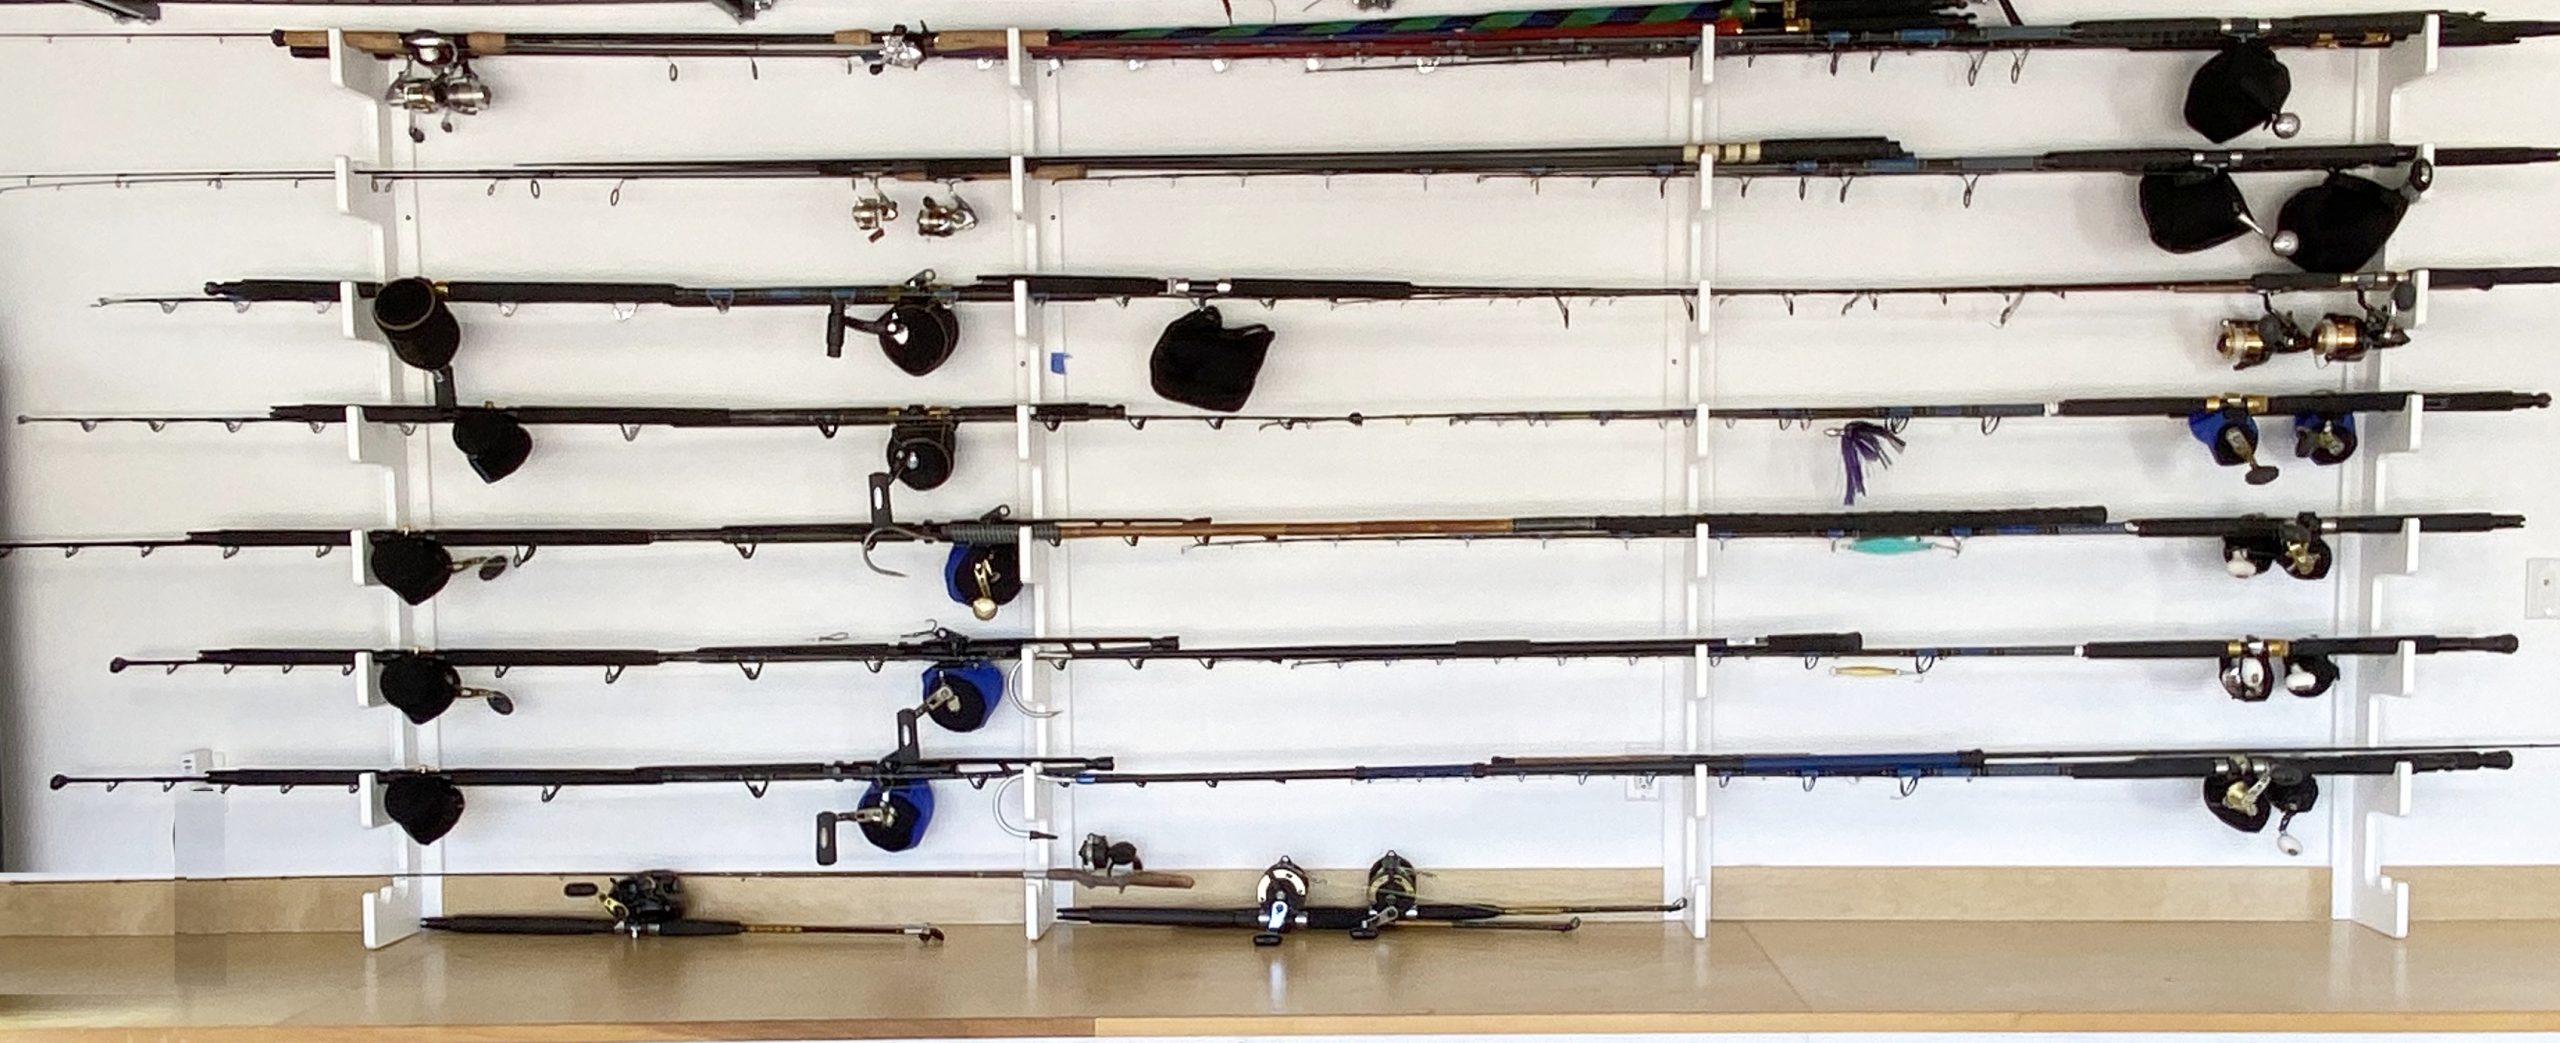 Horizontal Rod Rack for Fishing Rod Wall Rack Storage-Ultra Sturdy Strong  Weatherproof Holds 3 Rods- Space Saving for Fishing Rods，Hiking Poles, Ski